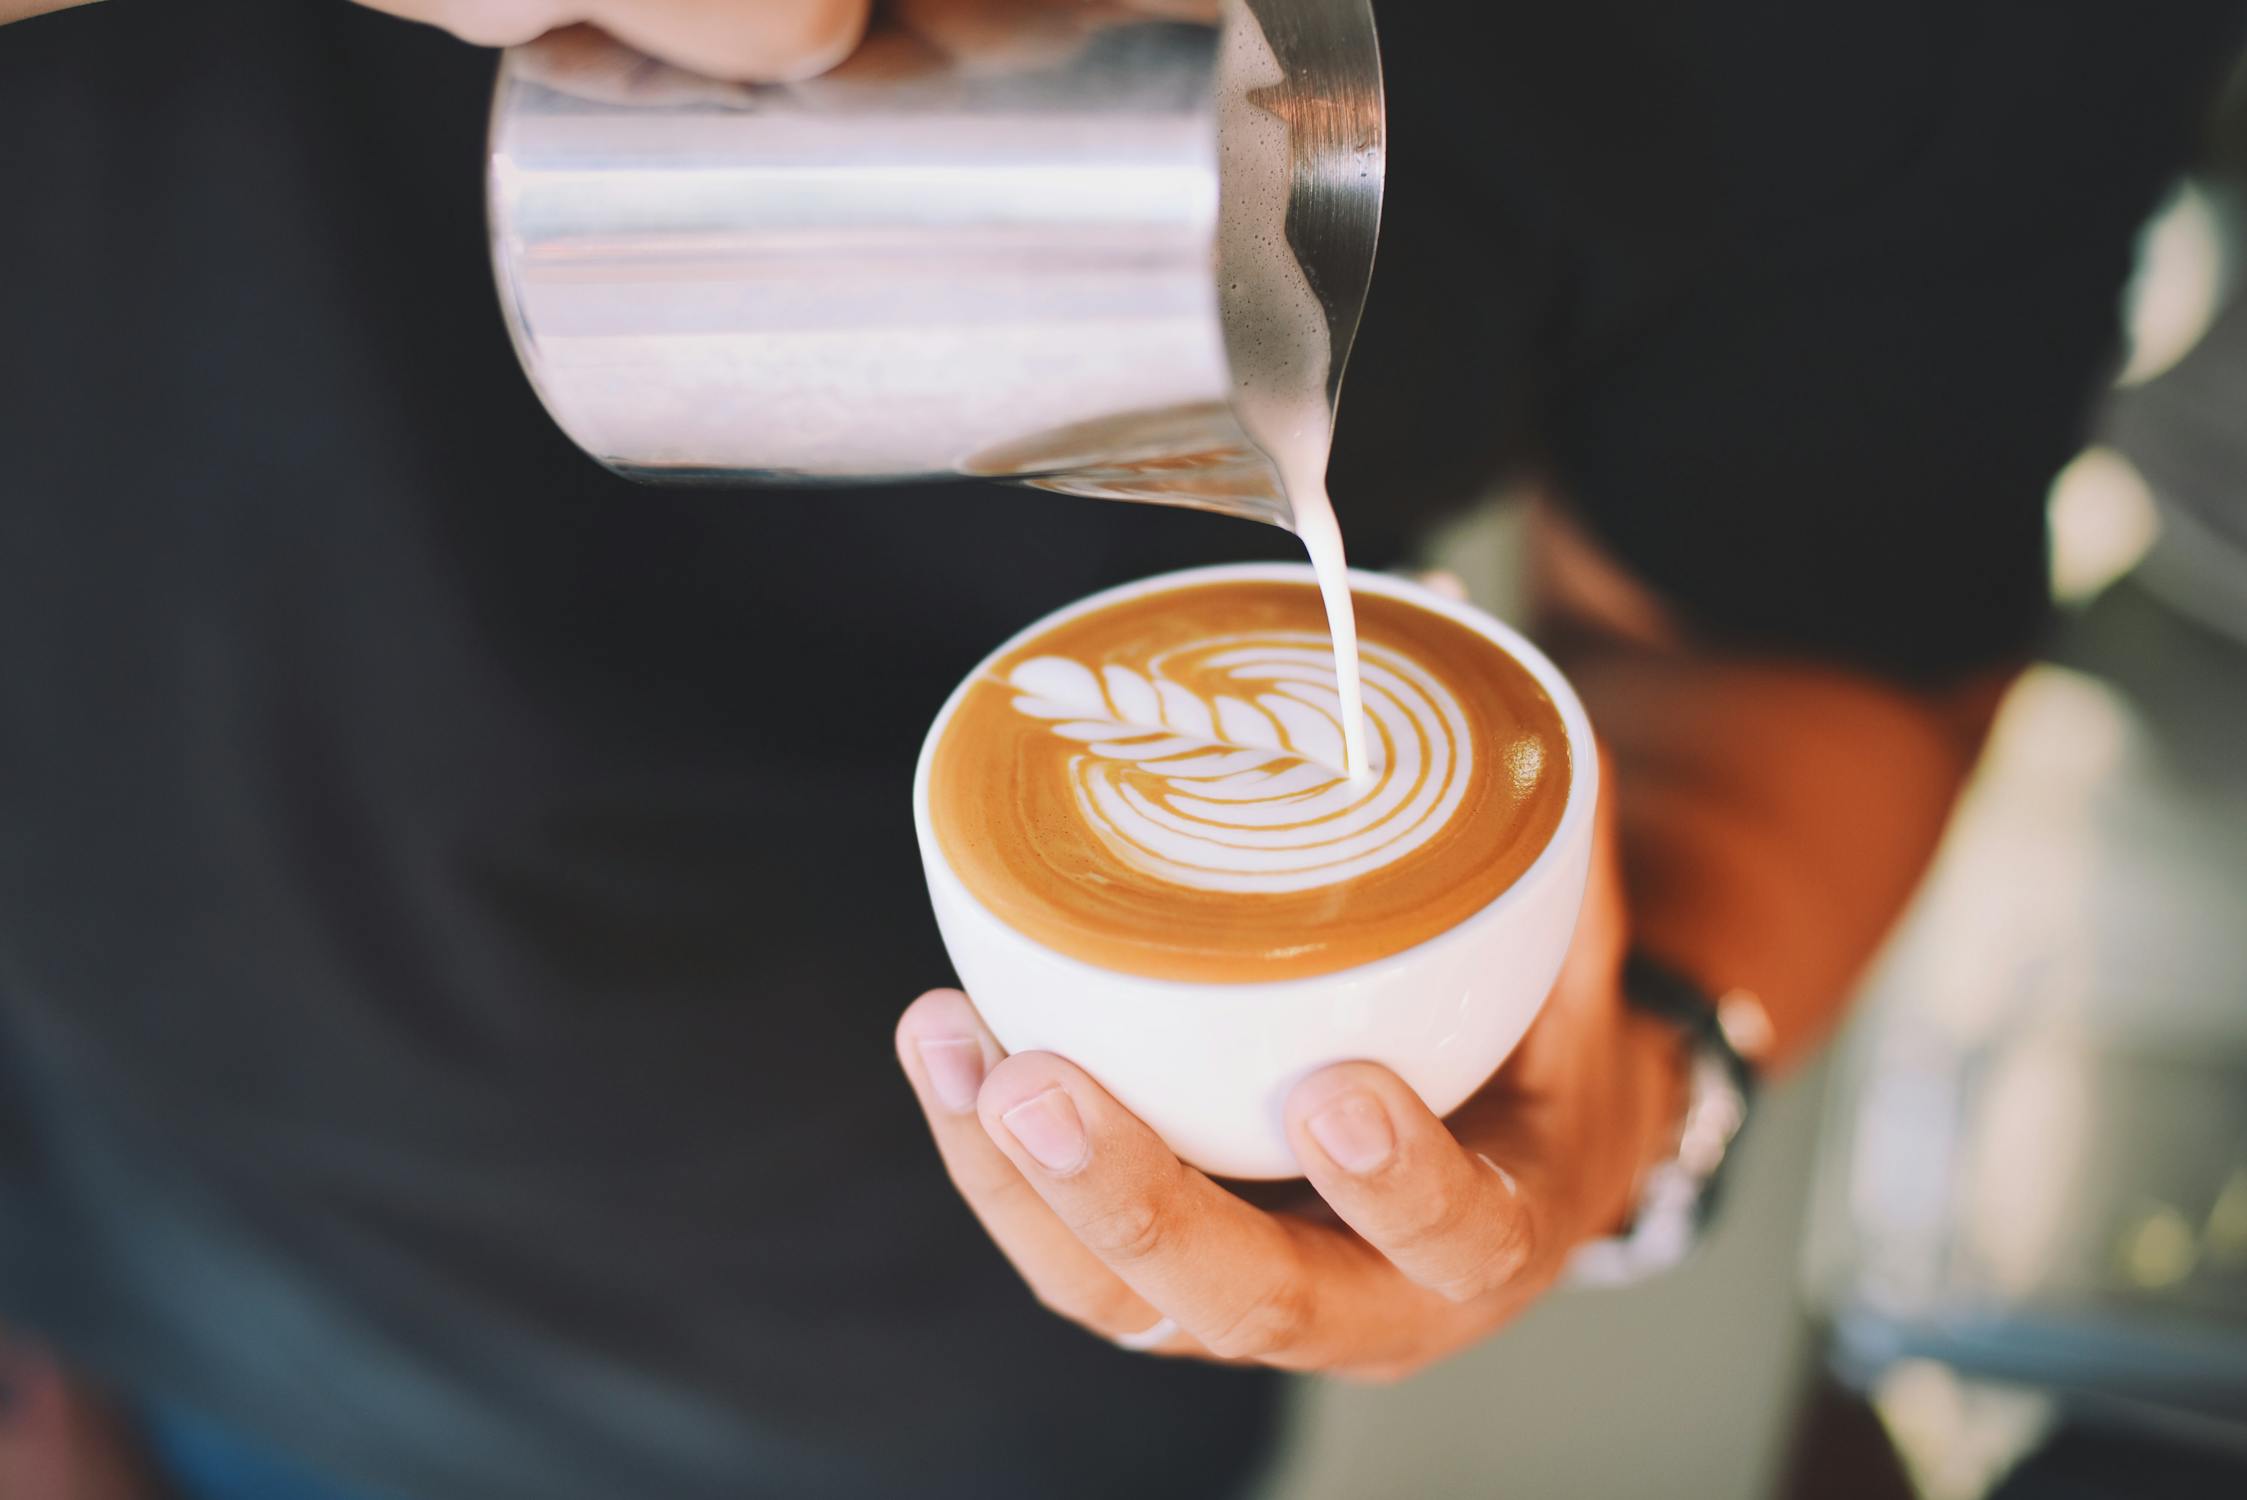 Coffee Time Photo by Chevanon Photography from Pexels: https://www.pexels.com/photo/close-up-of-hand-holding-cappuccino-302901/